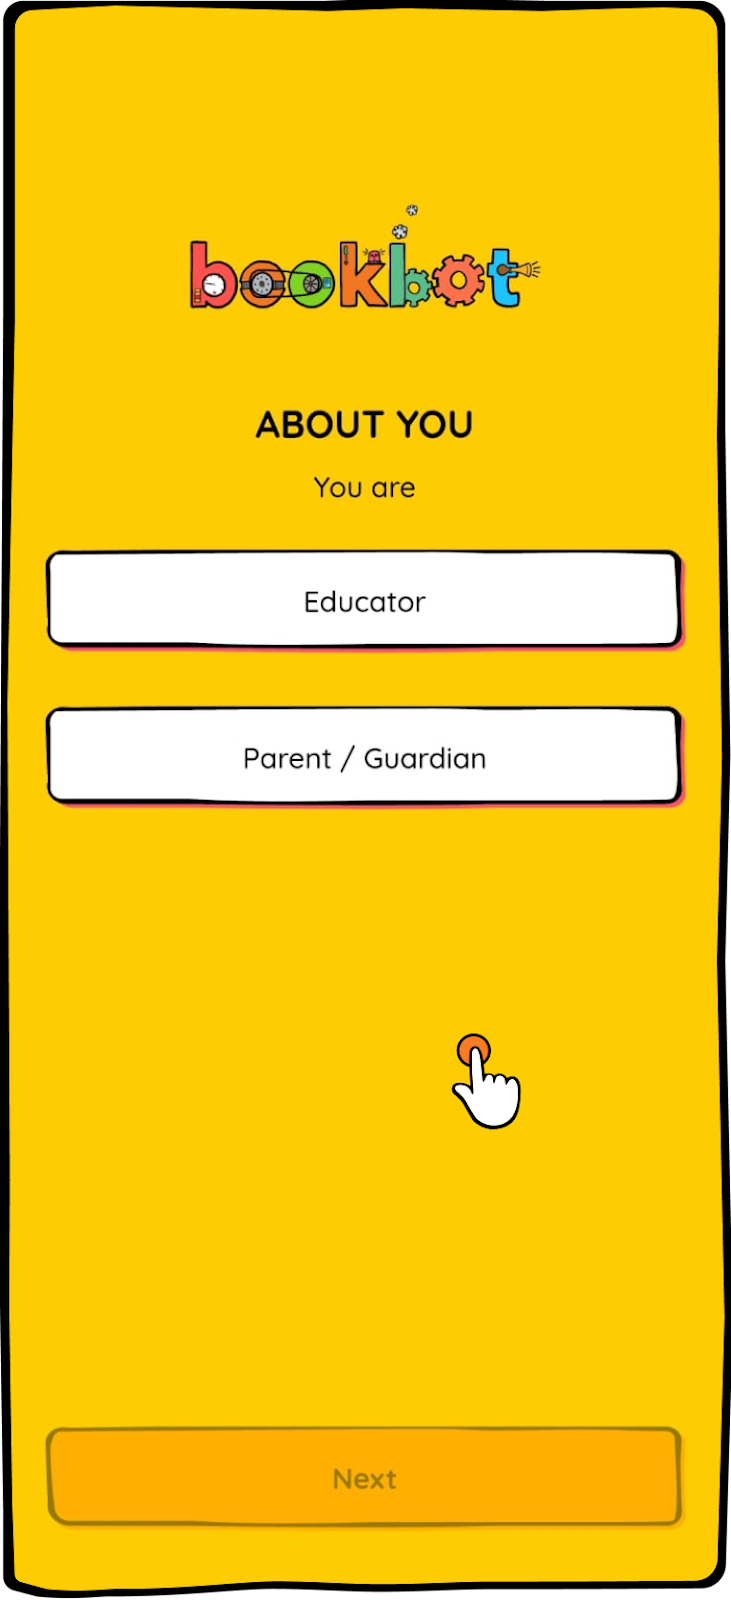 Select whether you're a teacher or a parent